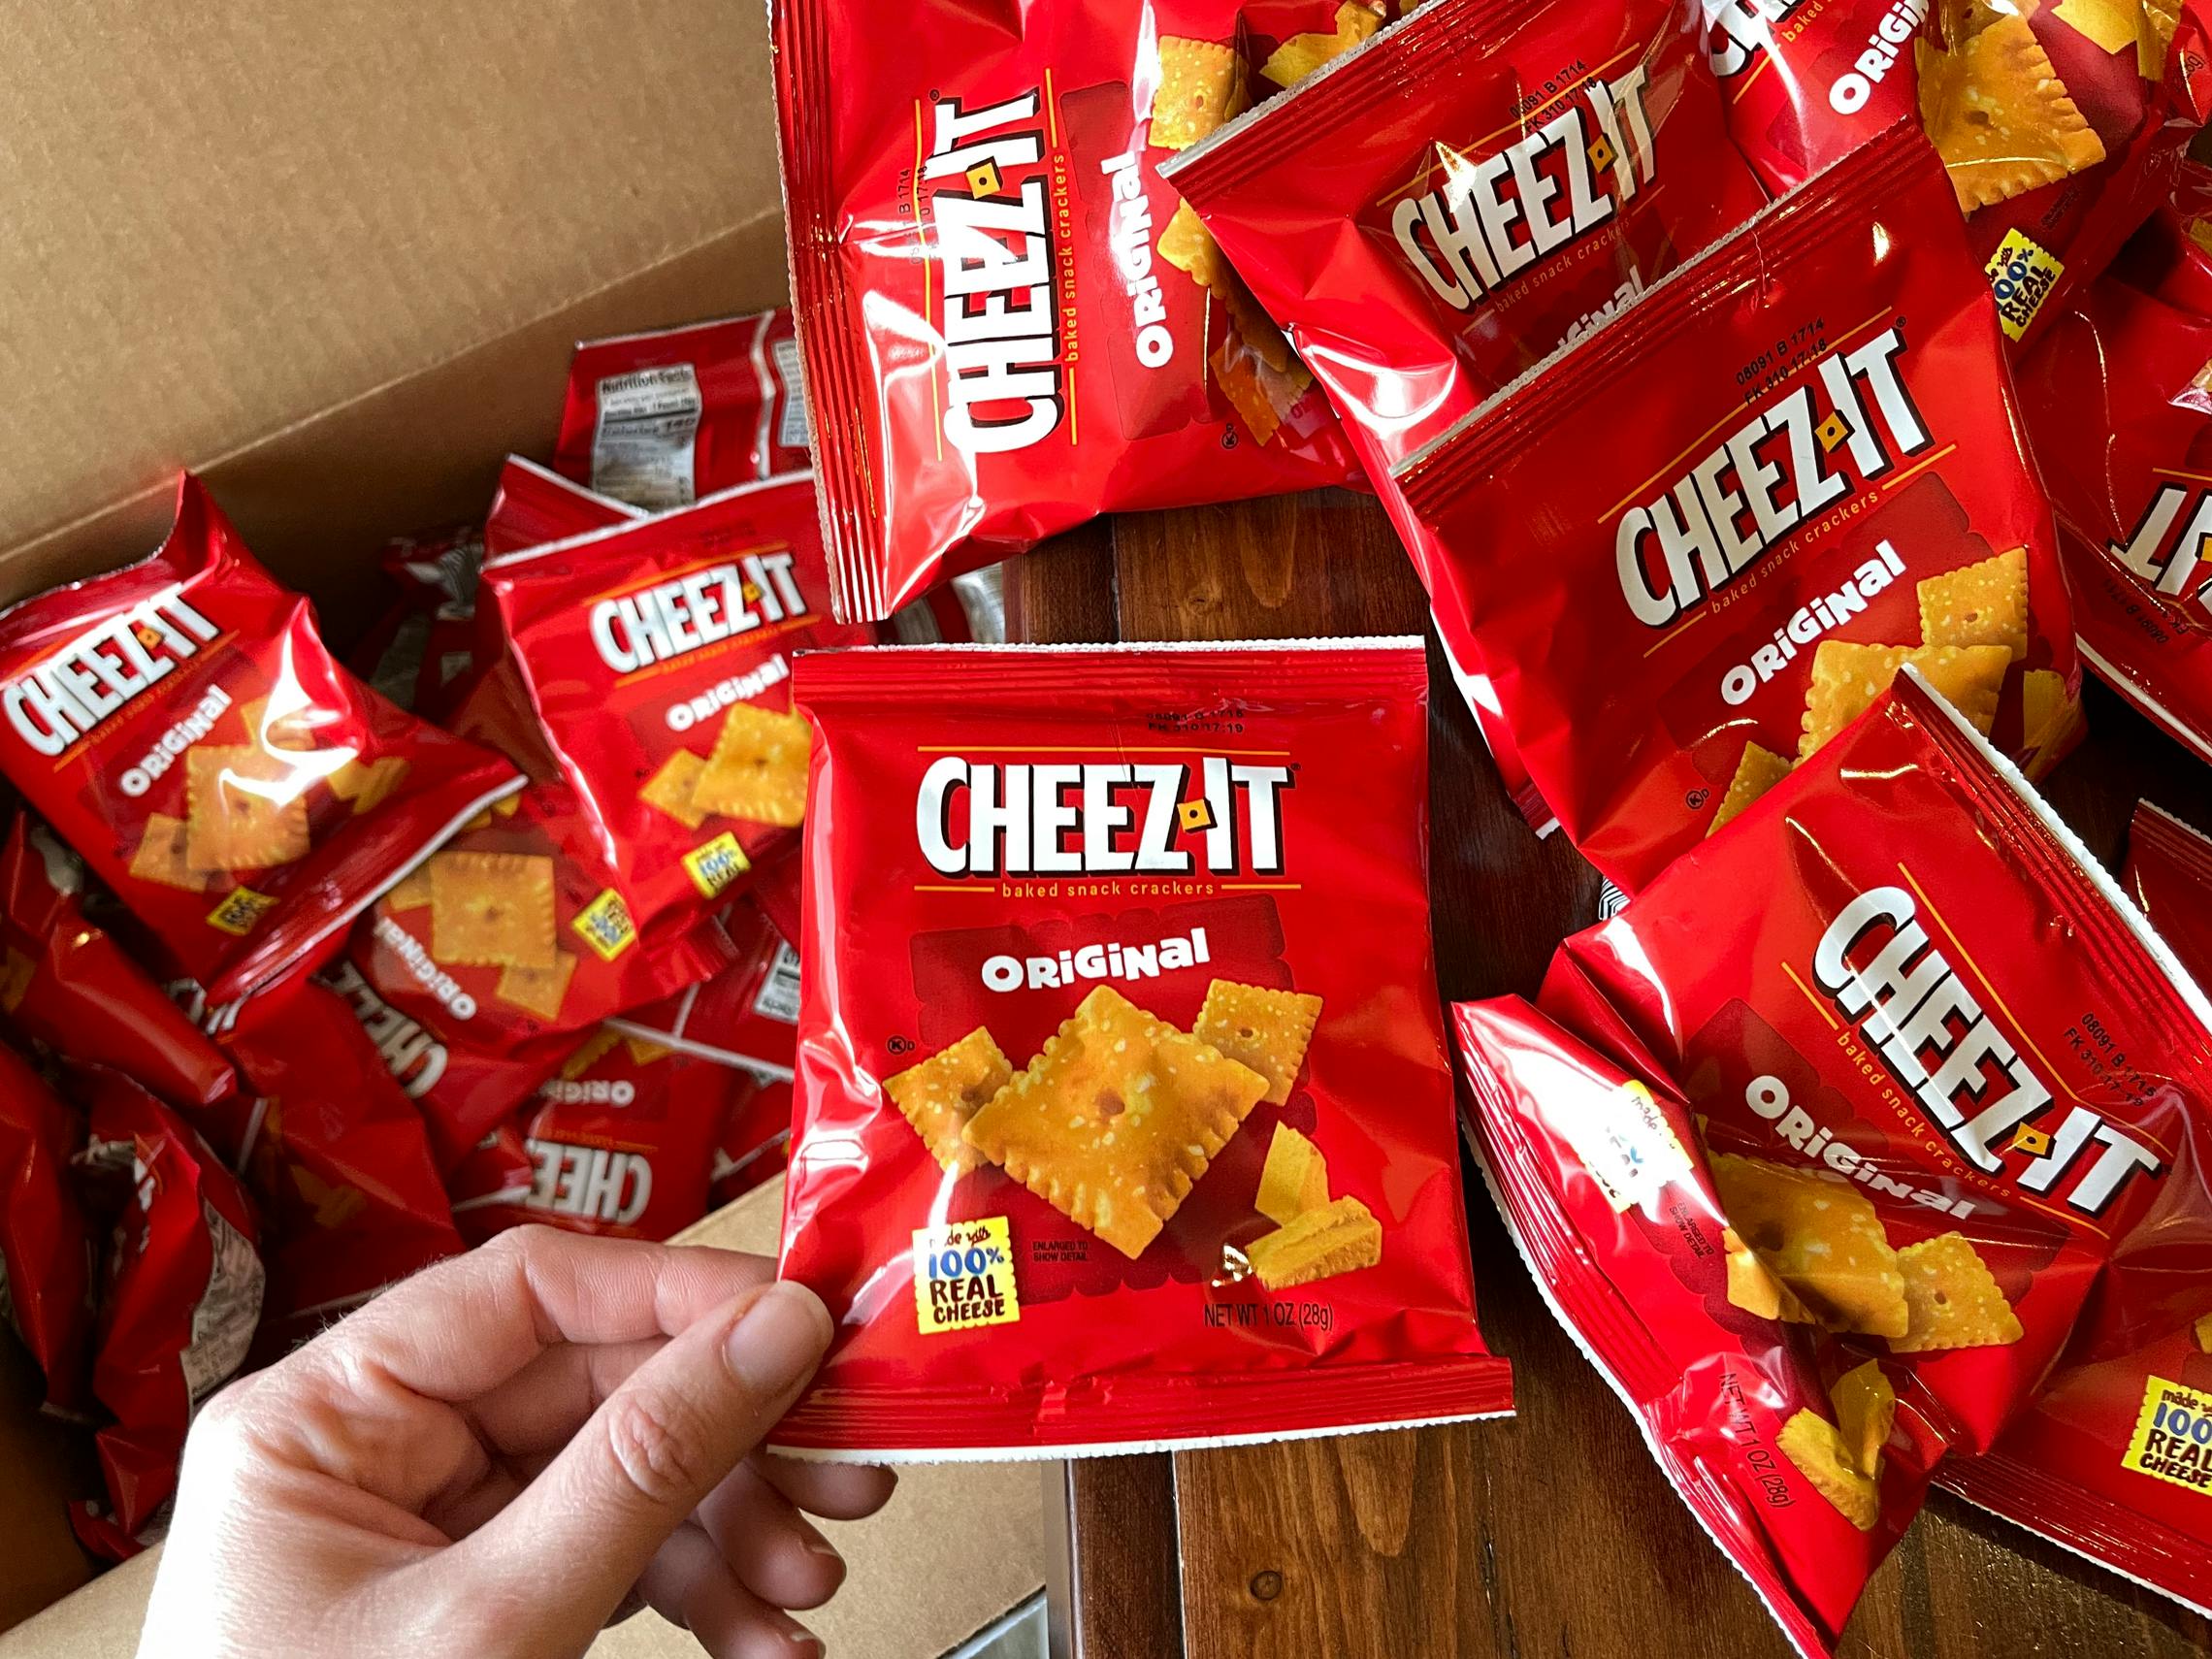 Snack bags of Cheez-its from Amazon